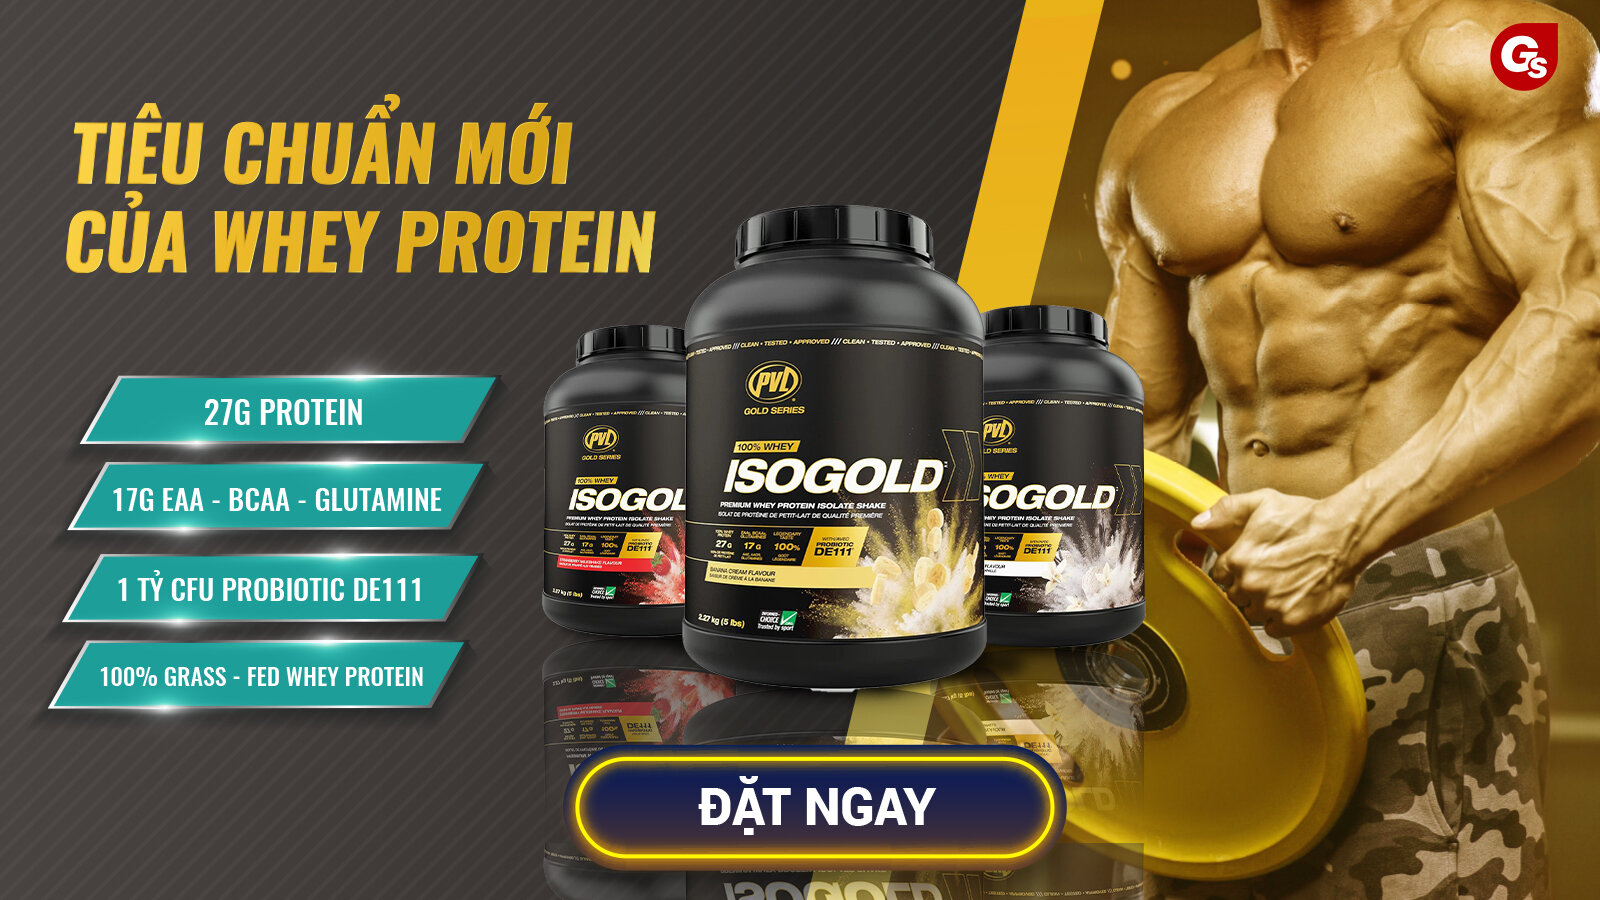 PVL-Iso-Gold-Whey-Protein-phat-trien-co-bap-gymstore